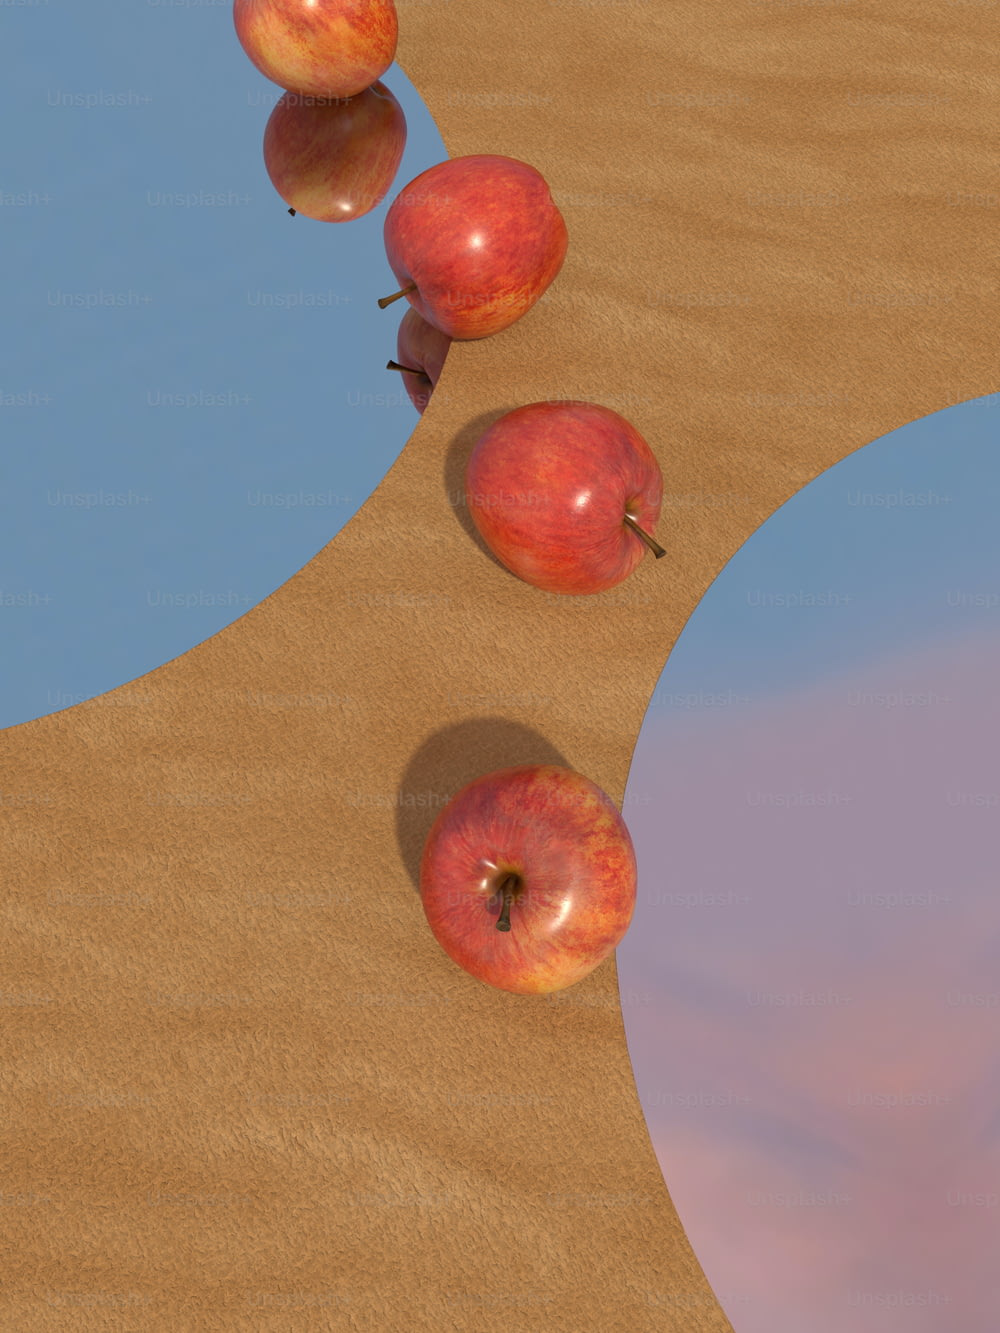 a group of apples sitting on top of a sandy beach